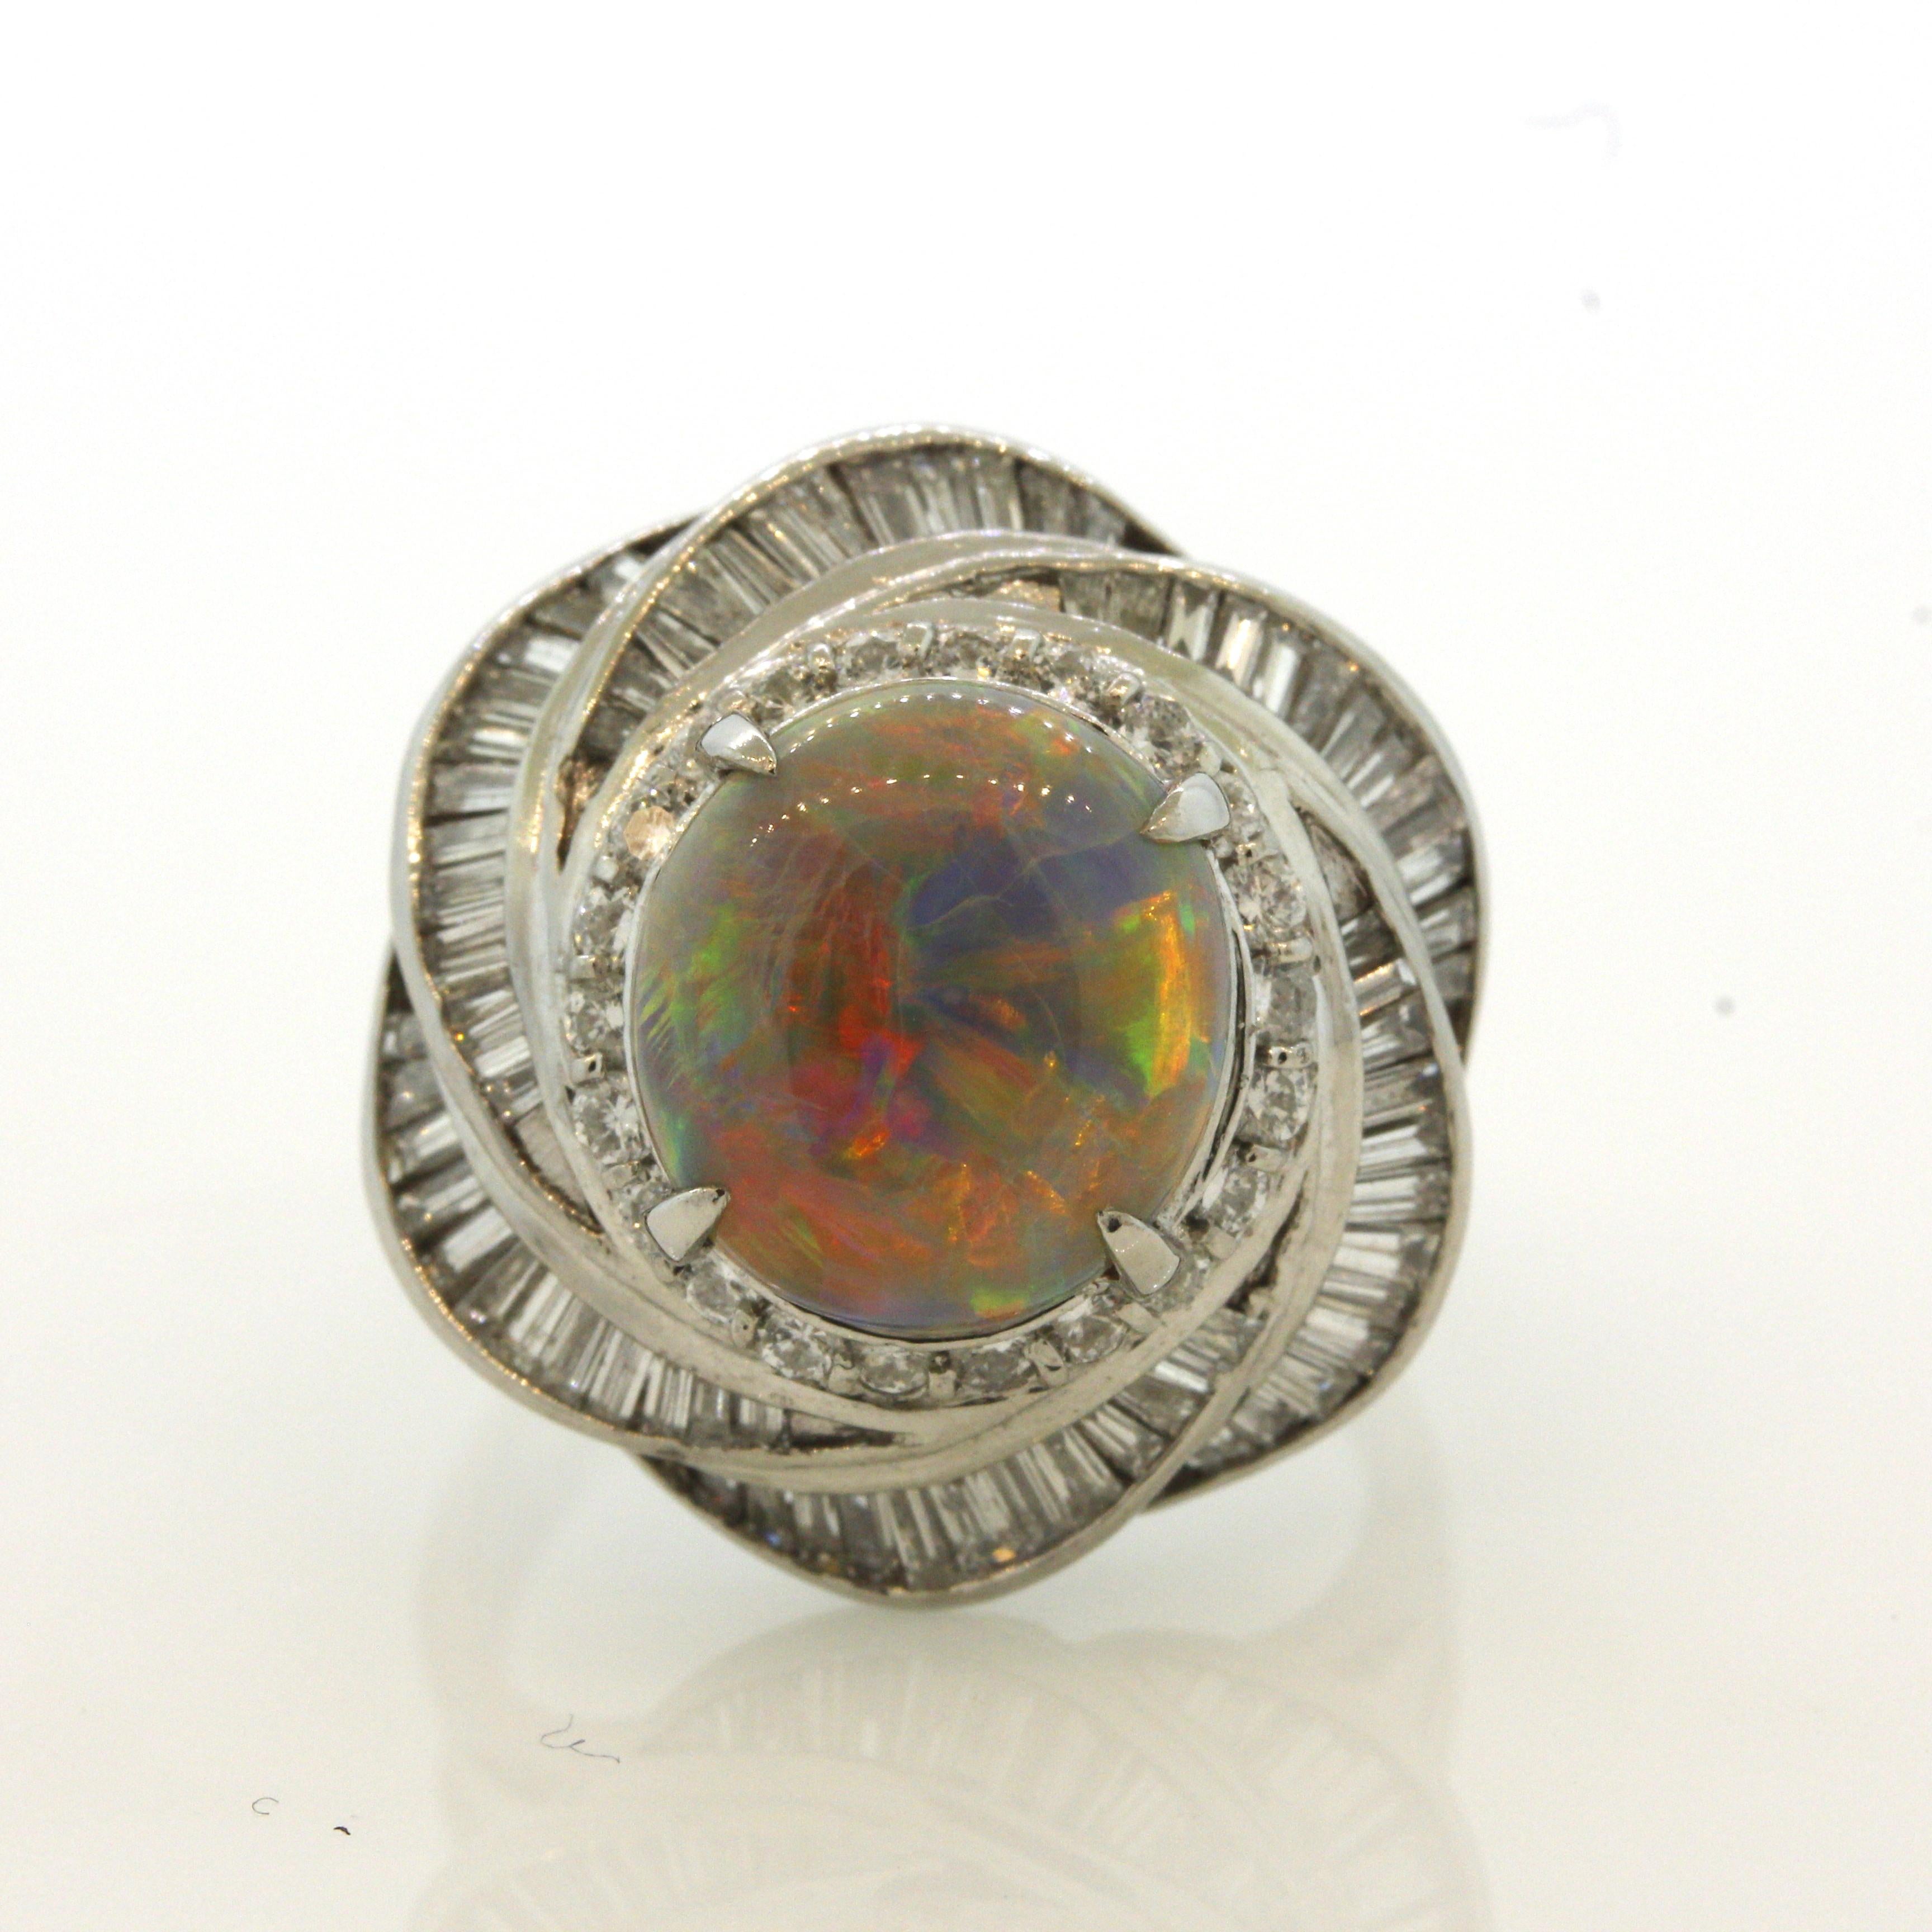 A mesmerizing fine natural Australian opal takes center stage. It weighs 3.92 carats and has amazing play-of-color, every color in the rainbow can be seen across the stone! Bright flashes of predominantly red and orange cover the opal along with